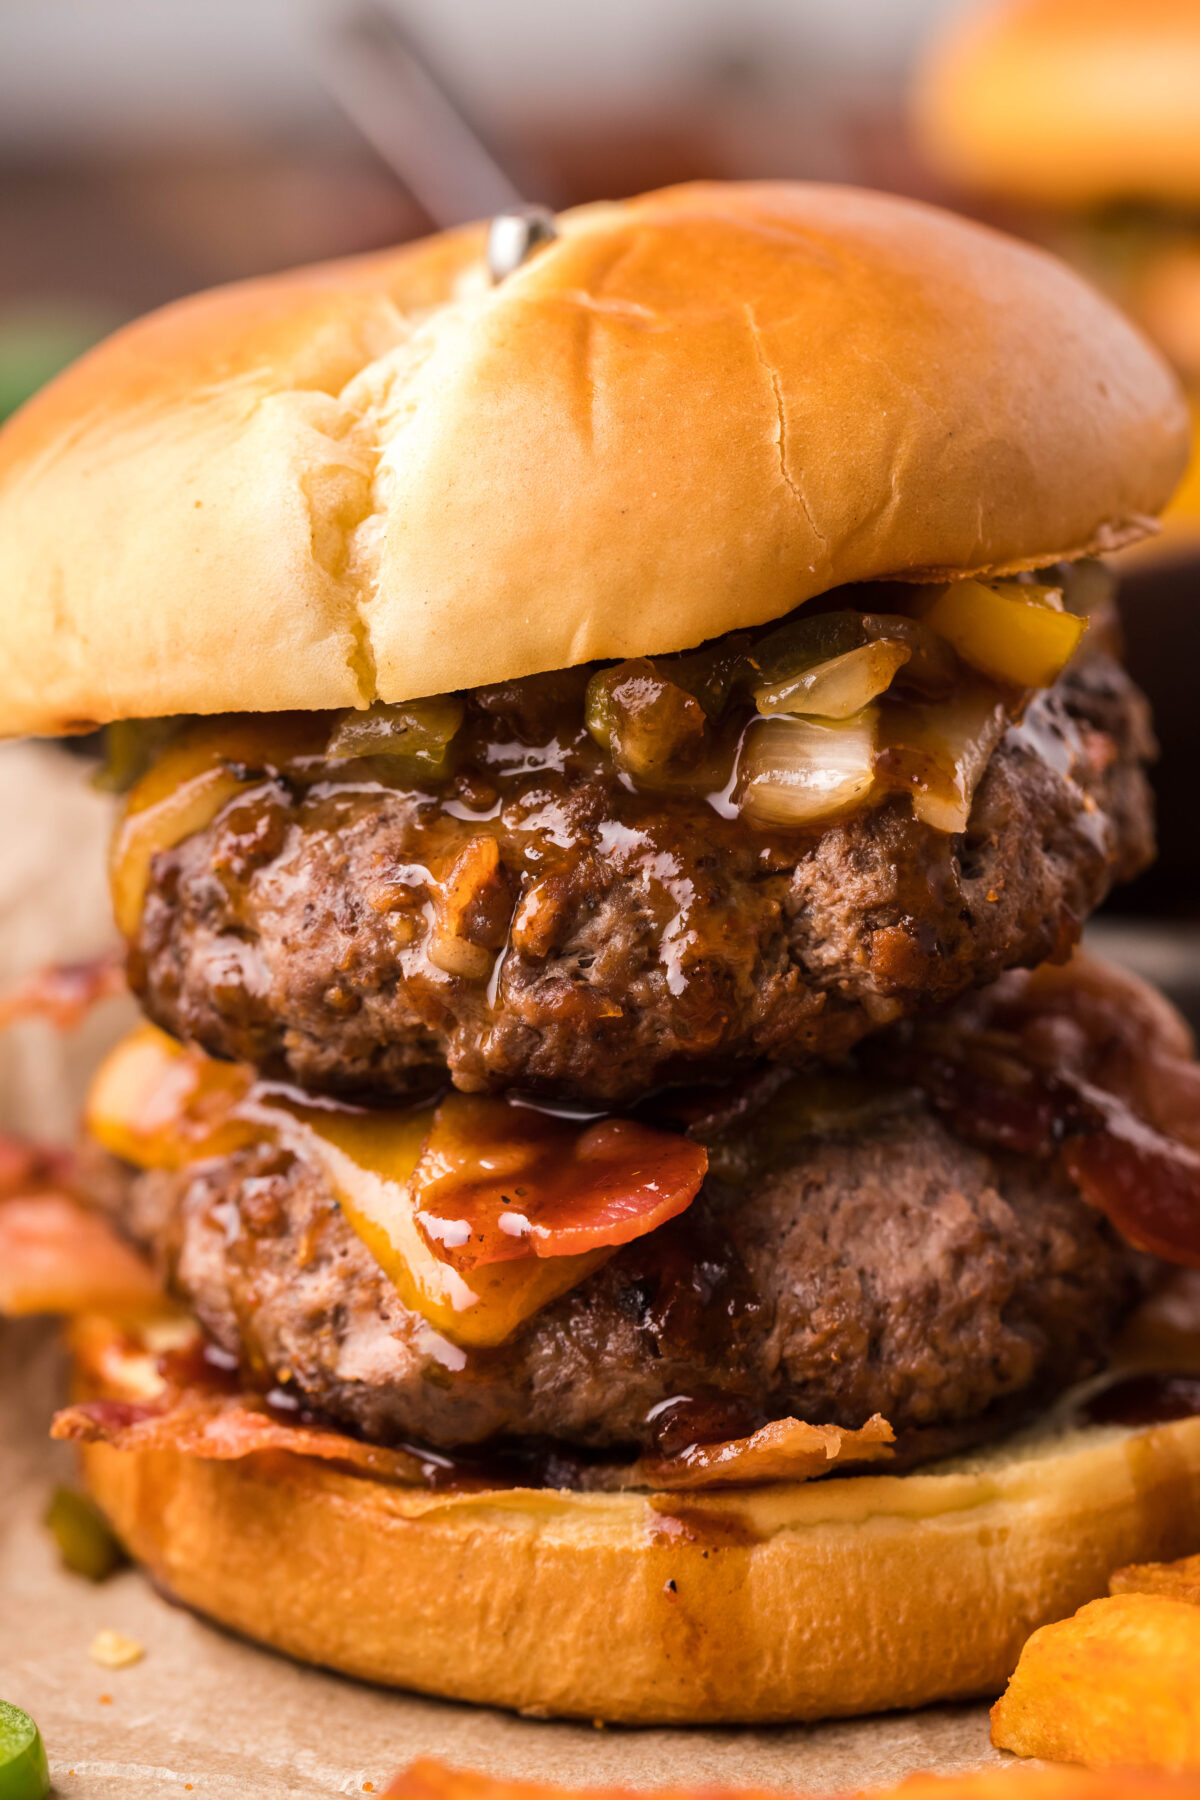 This sweet n spicy bacon burger recipe is easy to make and features caramelized onions and peppers with an amazing sweet n spicy bbq sauce.